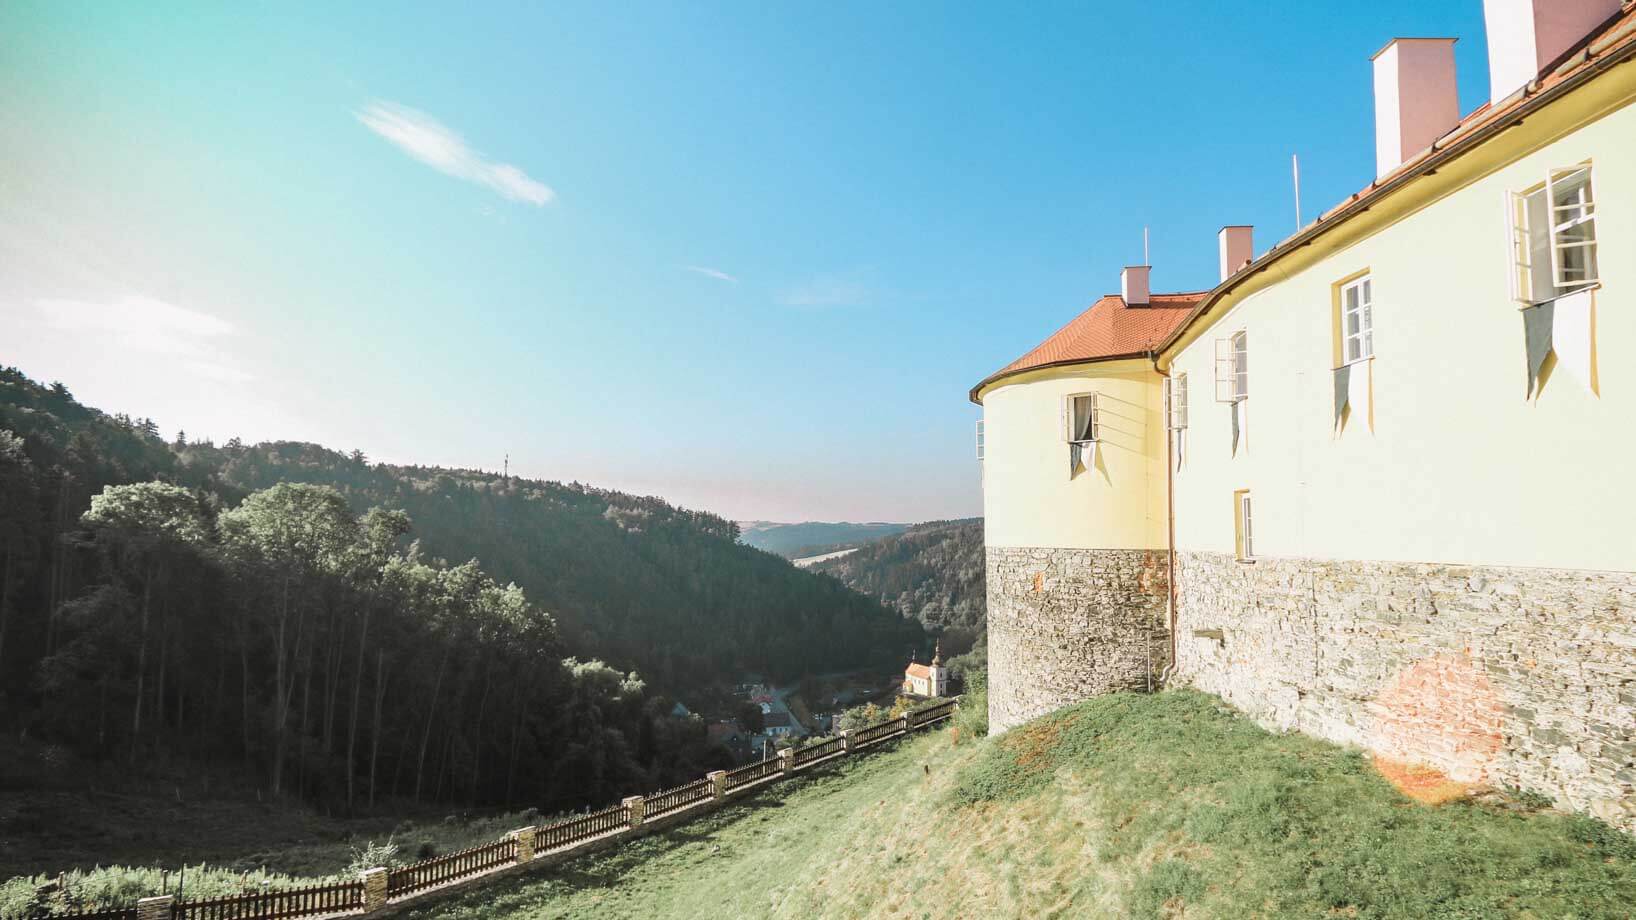 Svojanov Castle. Fairy-Tale Castles in Czech Republic That You Didn't Know About